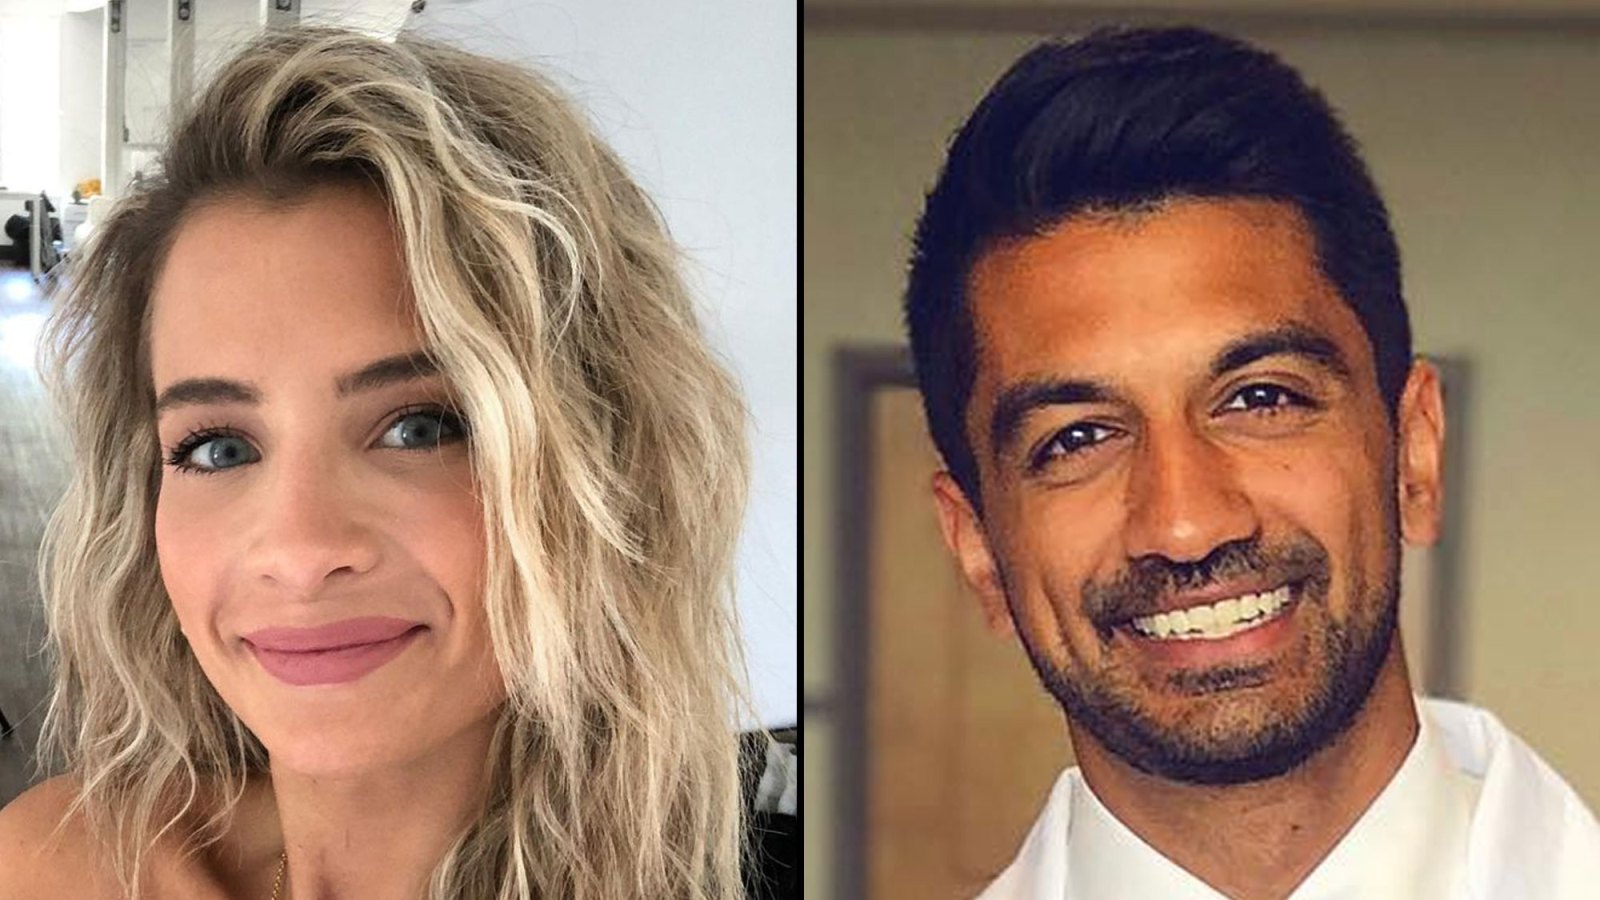 Naomie Olindo Will ‘Never’ Go Back to Ex Metul Shah After Alleged Cheating And Isn't 'Looking Back'